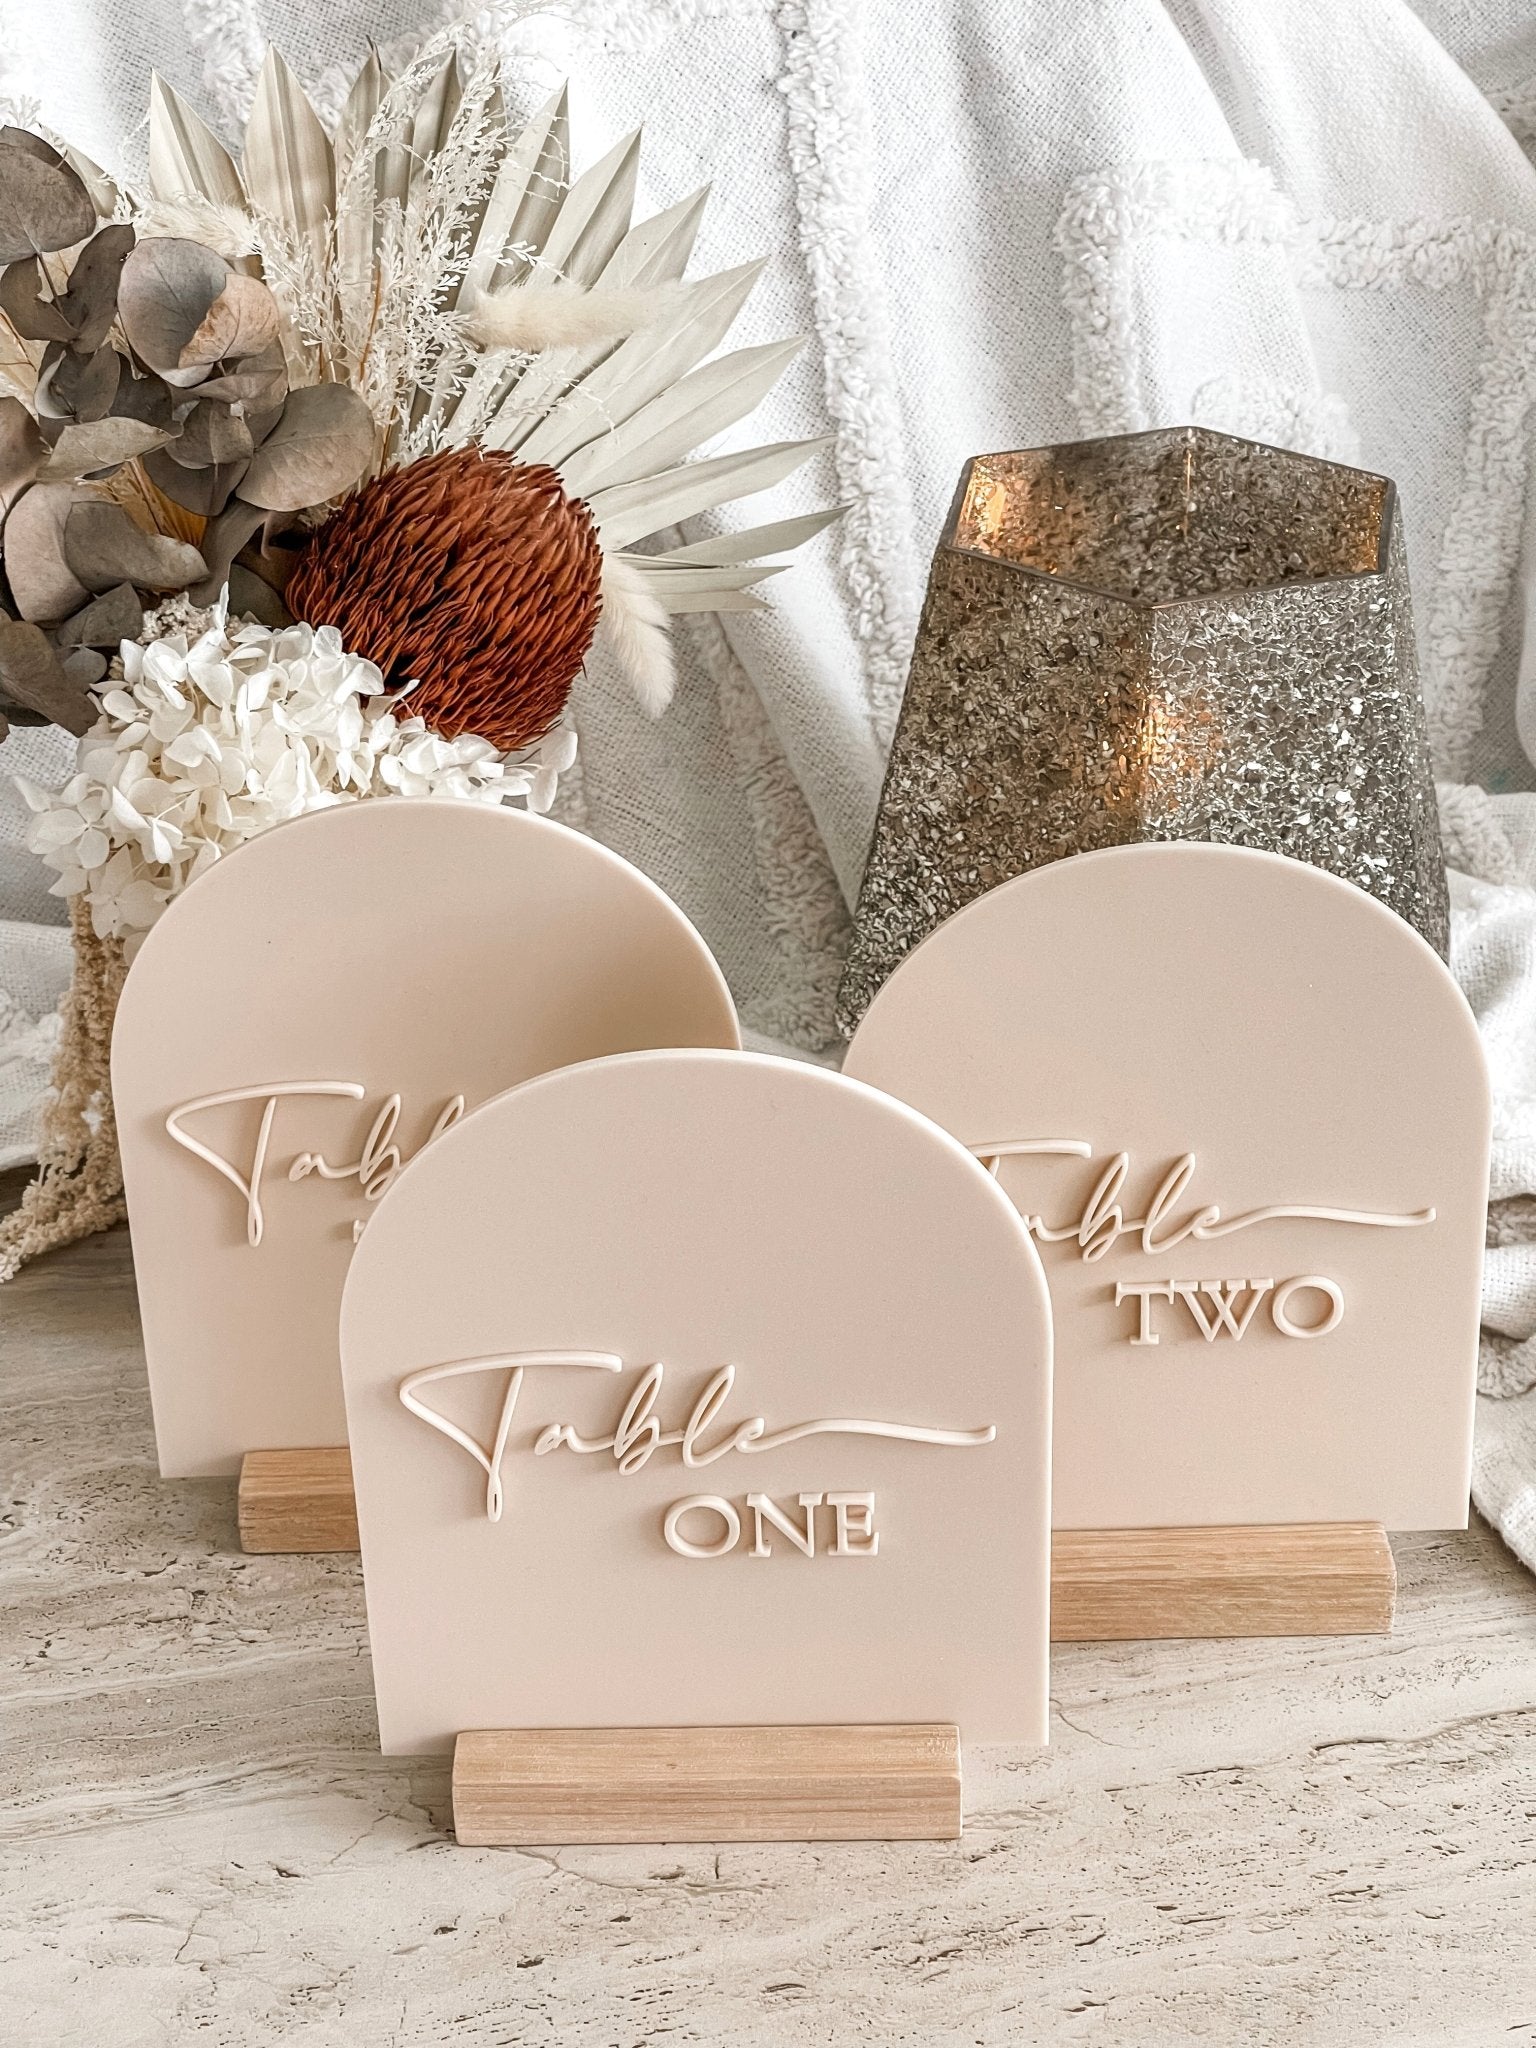 Swift Script Arched Acrylic Table Numbers - The Humble Gift Co.